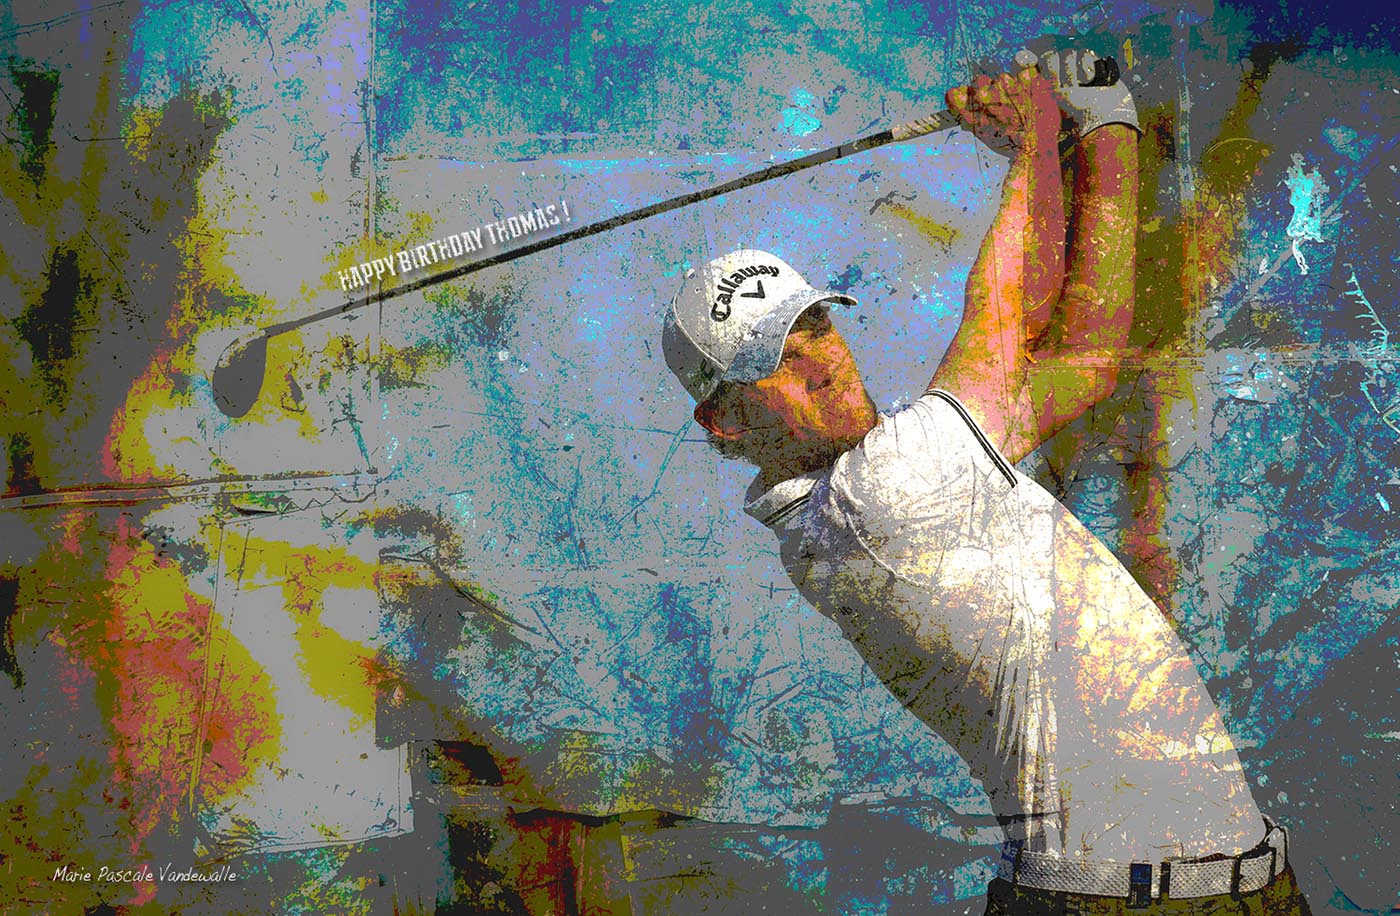 Happy Birthday to Rydercup star THOMAS PIETERS ! Photo Golf Art by Marie Pascale Vandewalle. Want a custom photo art for yourself, to surprise a friend, for your business or as an extraordinary present to someone you love, I am here to create the perfect memory for you.